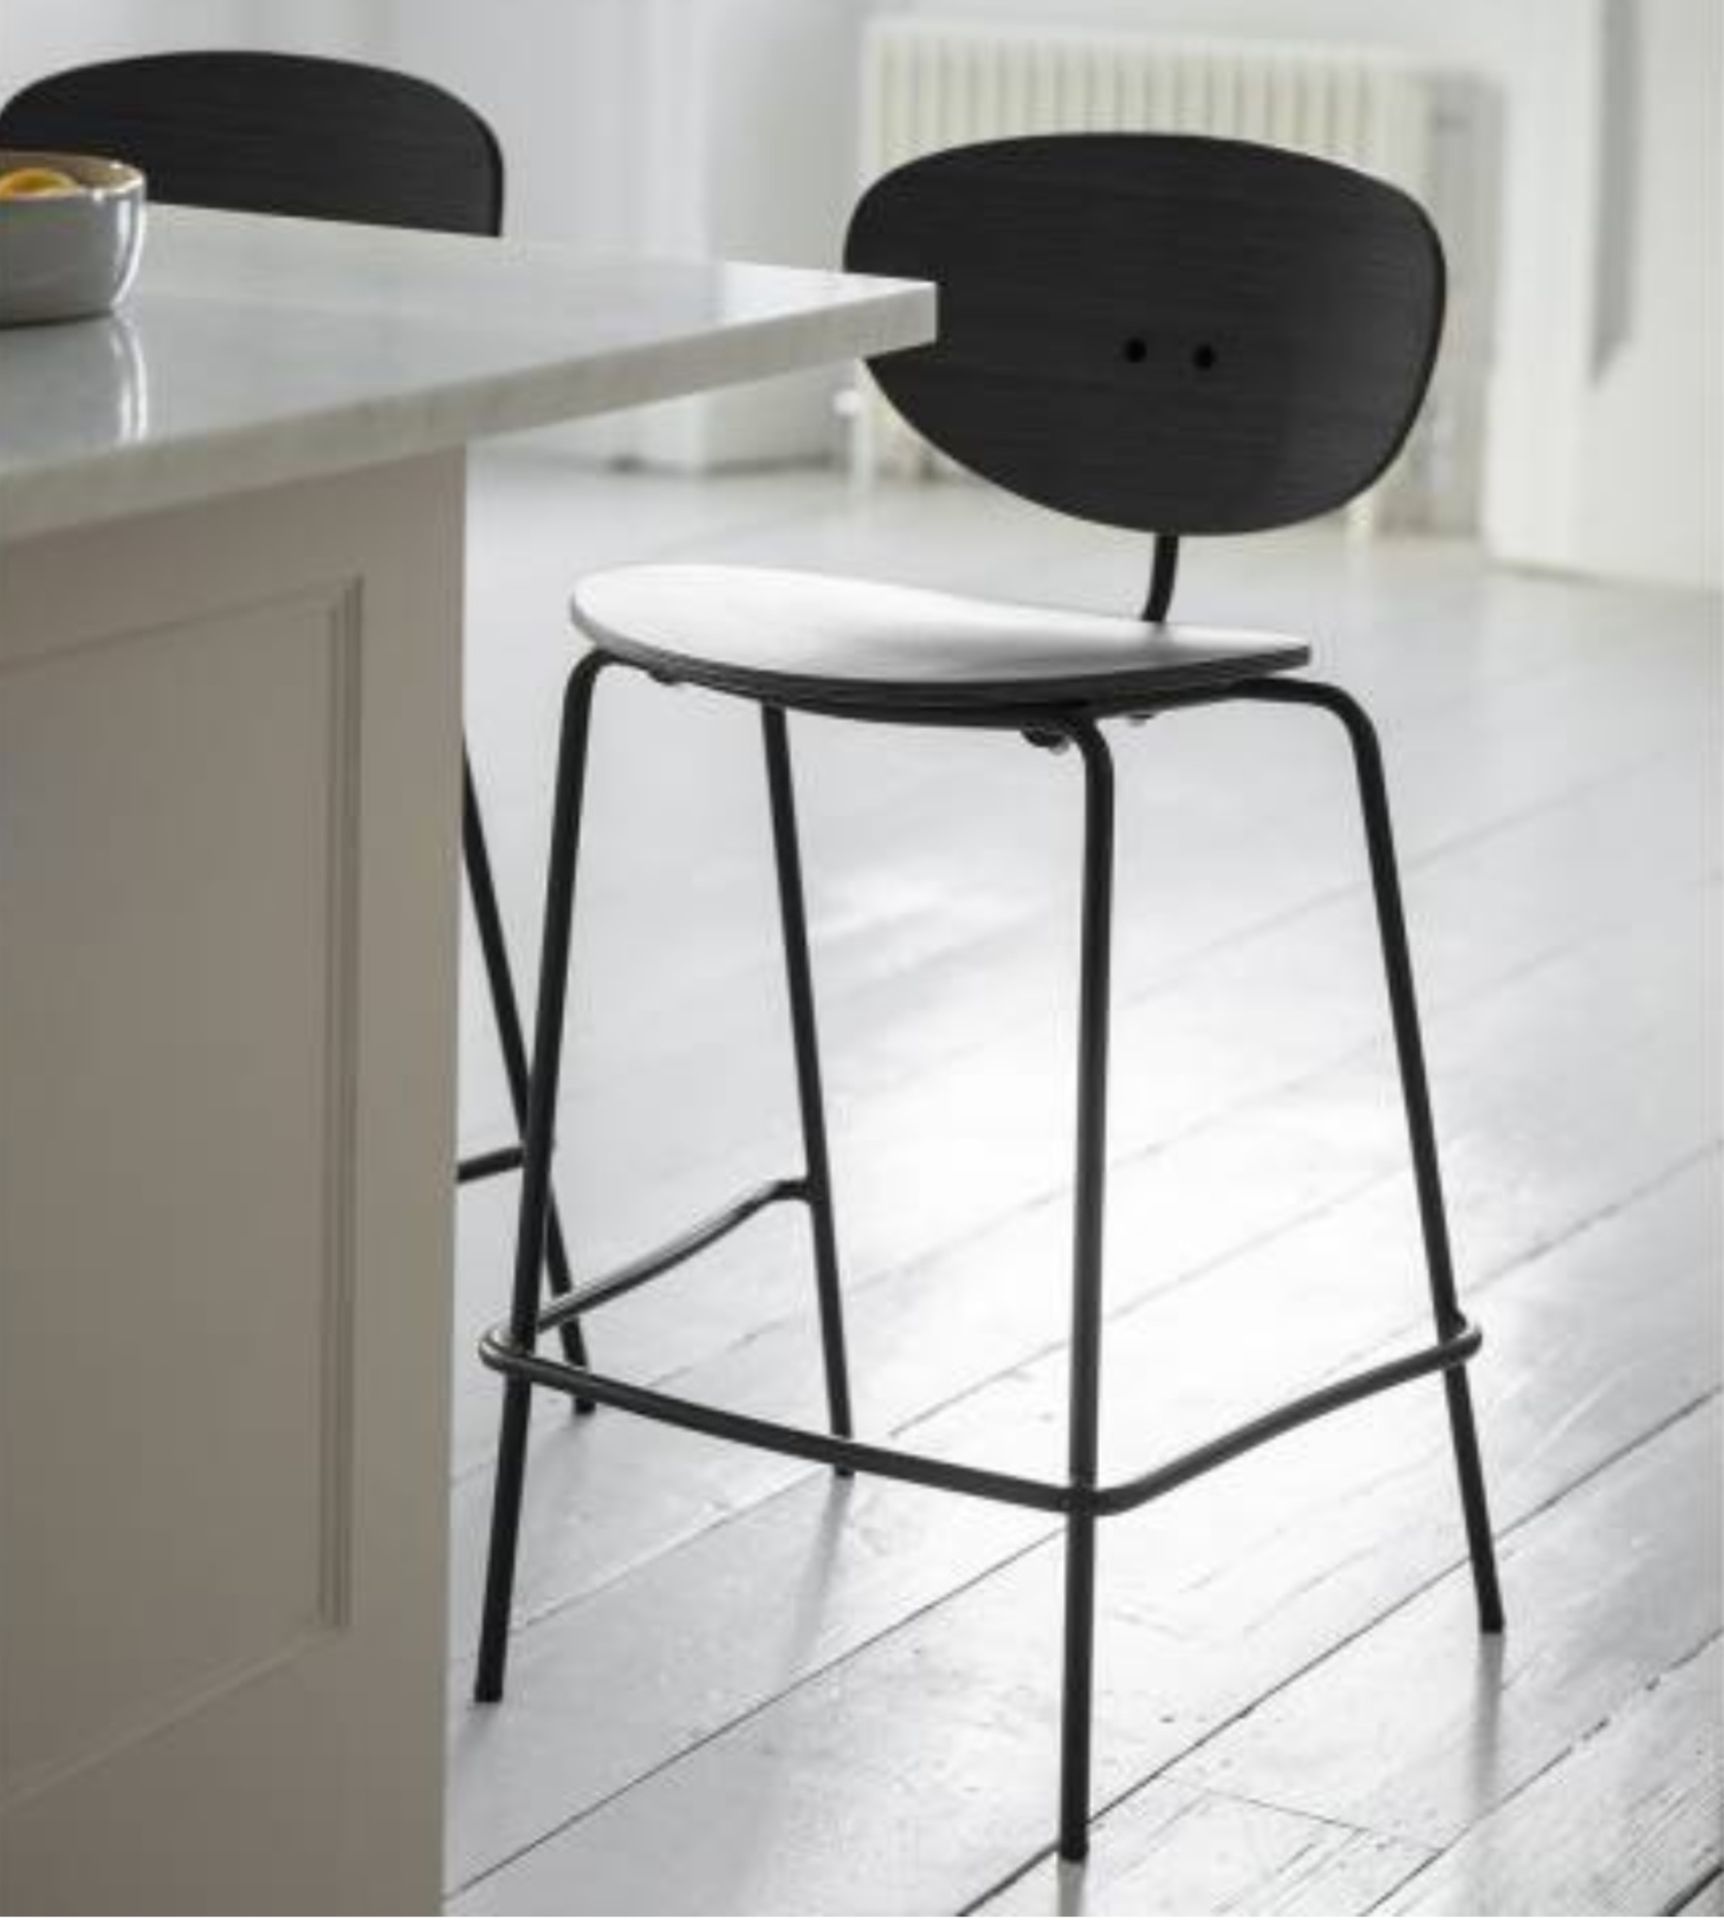 Sidcup Stool Black The Sidcup Stool Is The Latest Addition To Our Range Of Modern And Contemporary